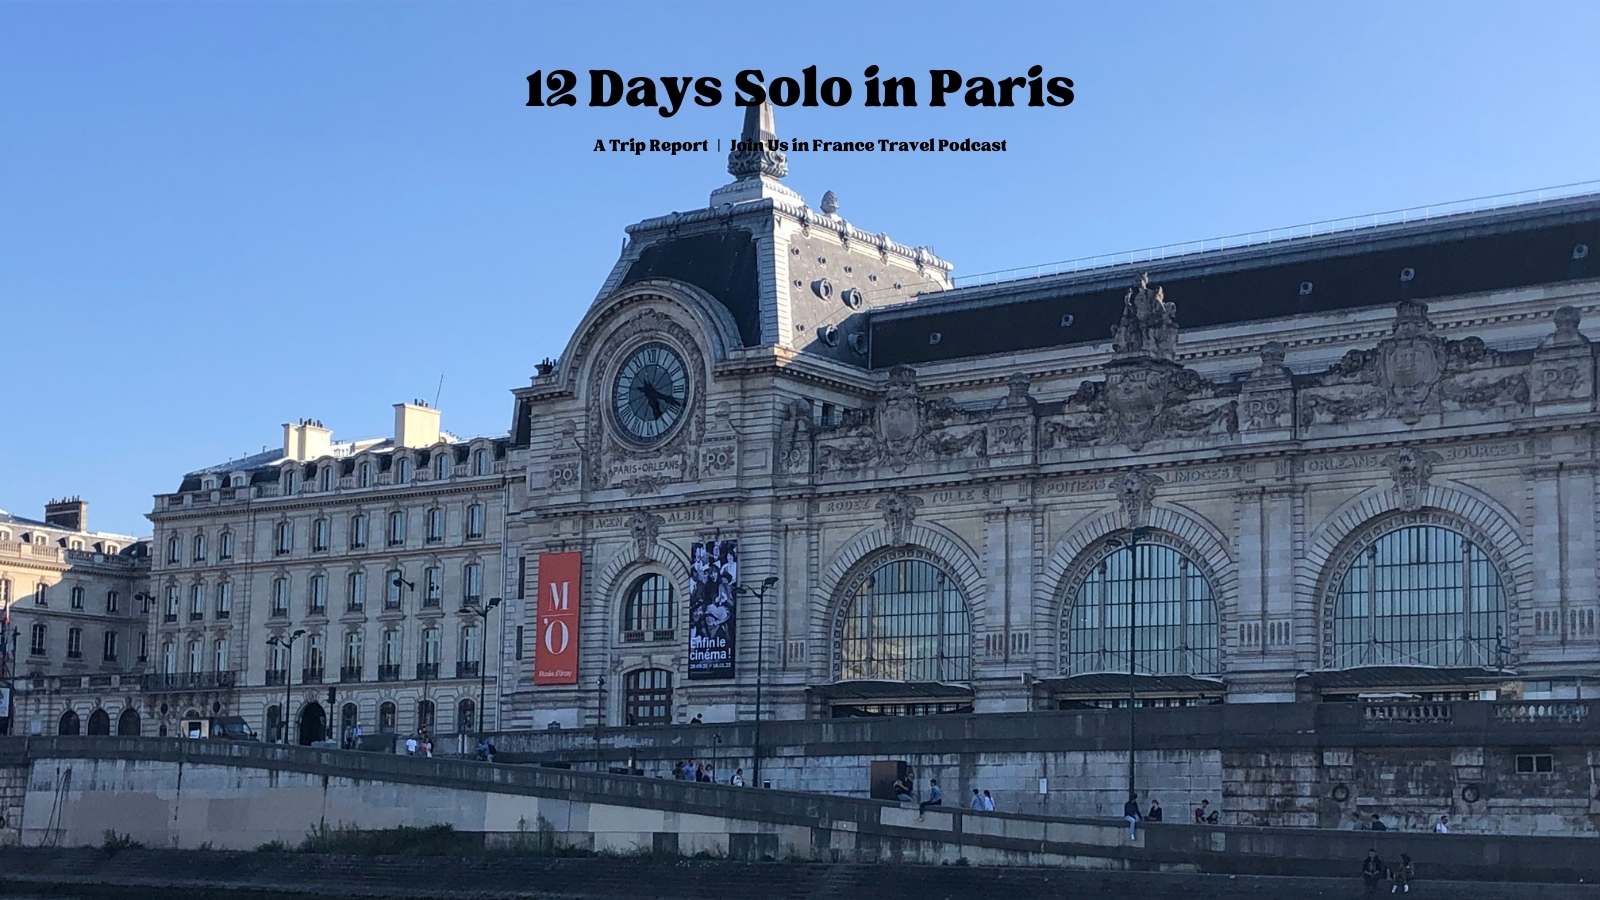 The exterior of the Orsay Museum seen from the Seine River: 12 days solo in Paris episode